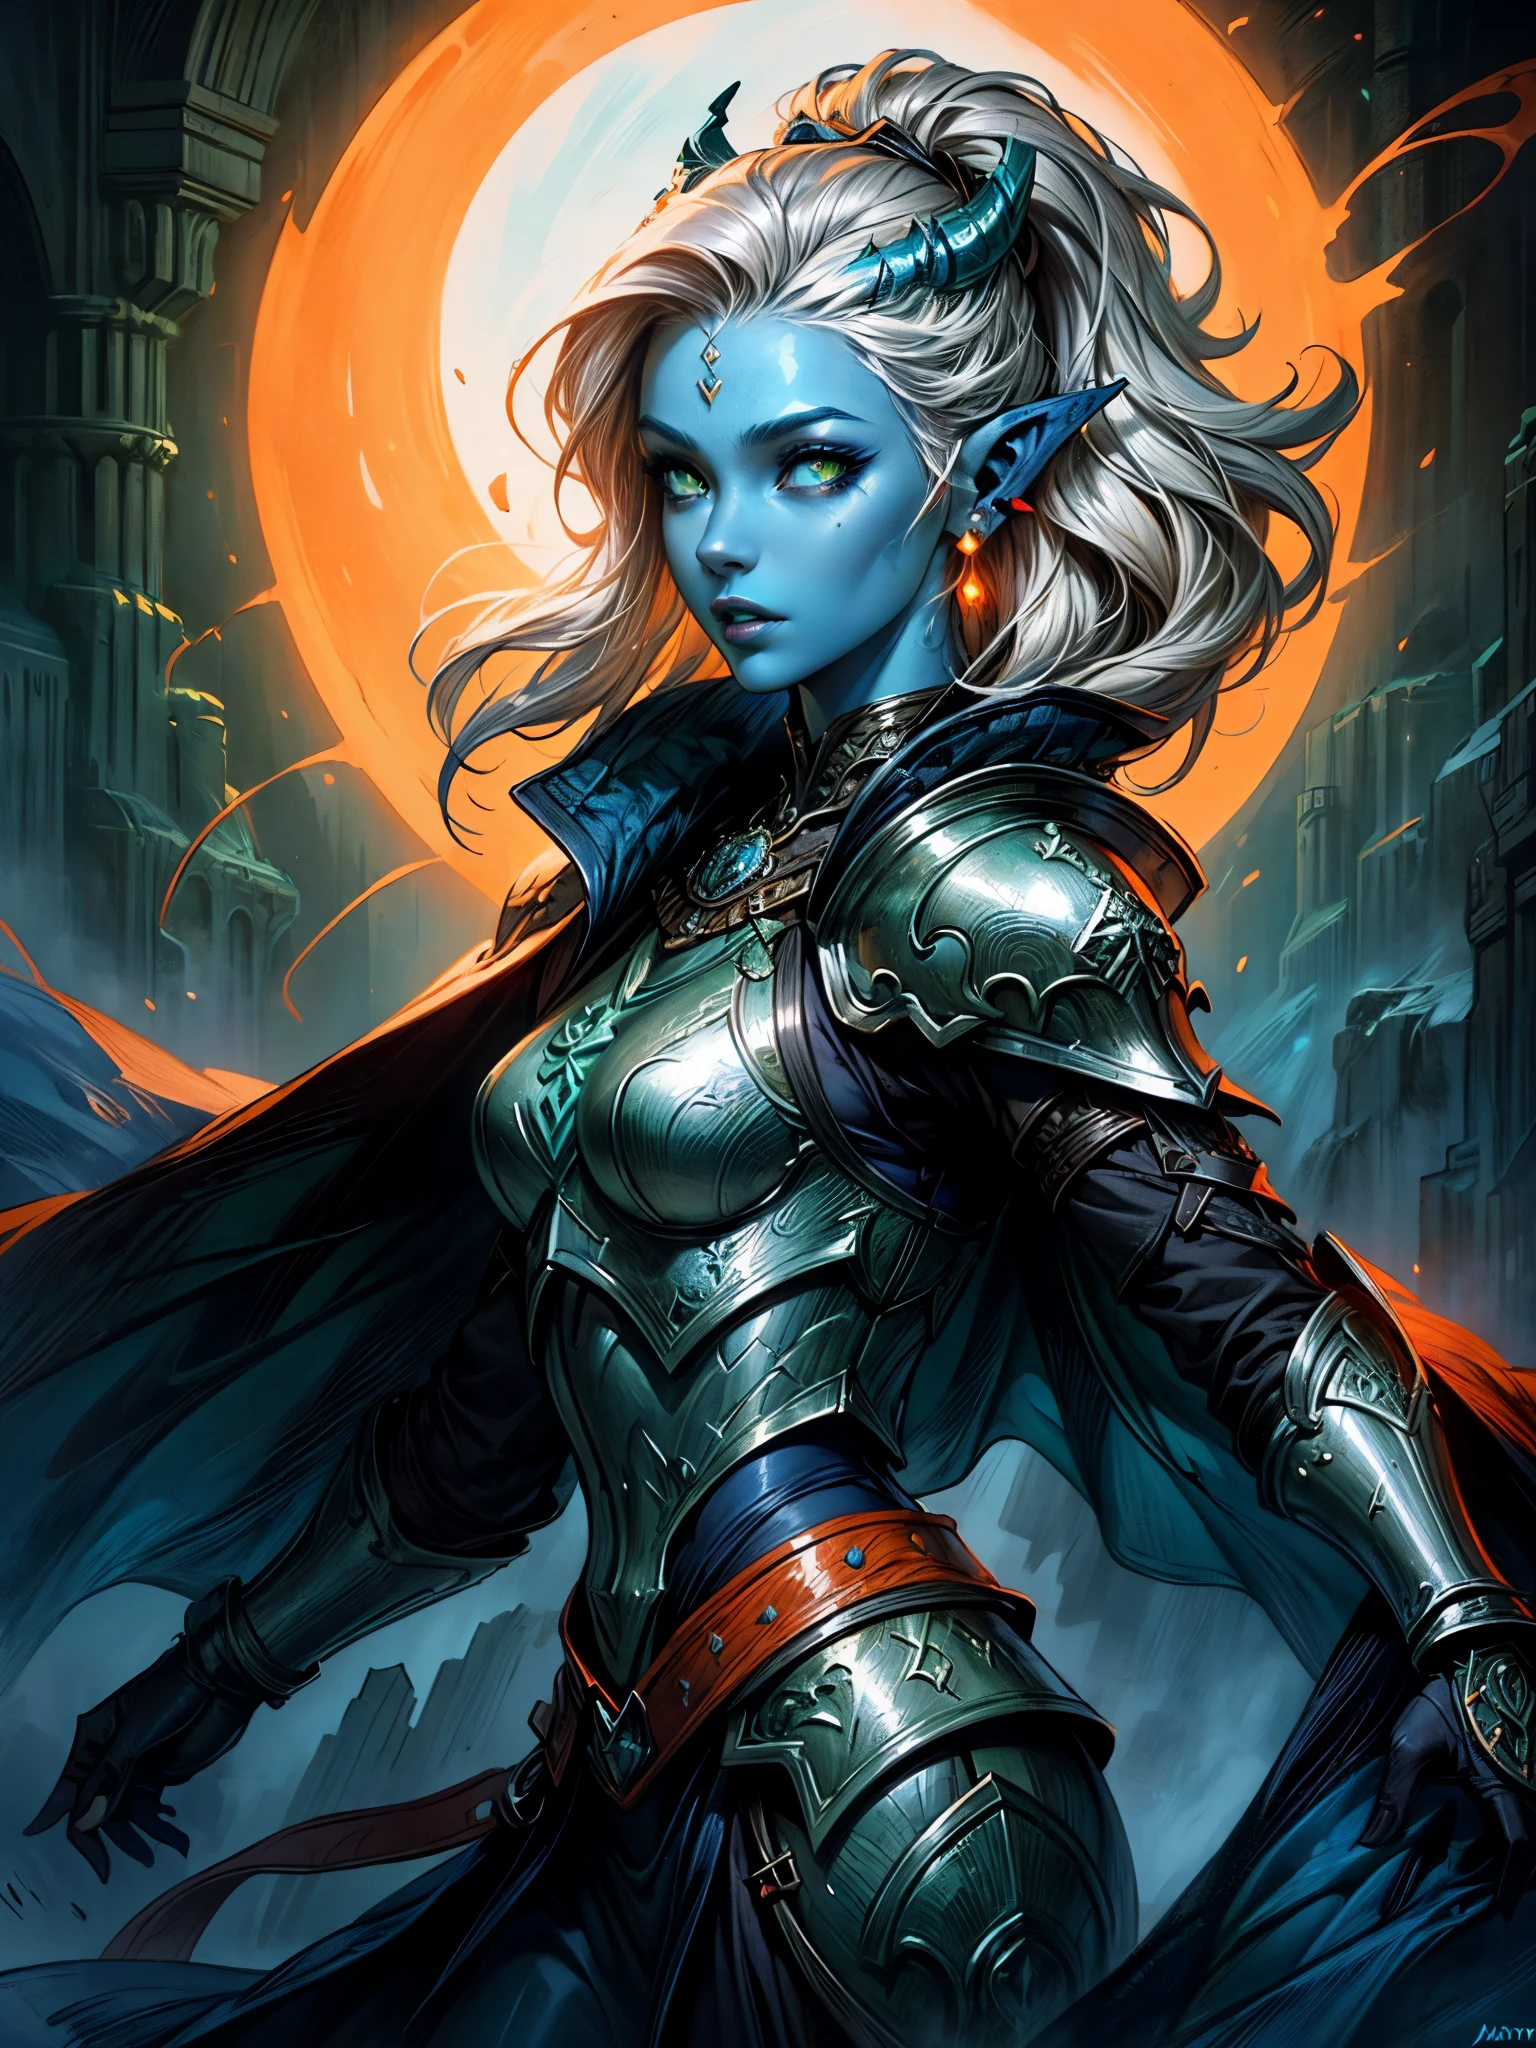 fantasy art, dnd art, RPG art, wide shot, (masterpiece: 1.4) a (portrait: 1.3) intense details, highly detailed, photorealistic, best quality, highres, portrait a female (fantasy art, Masterpiece, best quality: 1.3) ((blue skin: 1.5)), intense details facial details, exquisite beauty, (fantasy art, Masterpiece, best quality) cleric, (blue: 1.3) skinned female, (white hair: 1.4), long hair, (hair hides ears: 1.5), (green eyes: 1.3), fantasy art, Masterpiece, best quality) armed a fiery sword red fire, wearing heavy (white: 1.3) half plate mail armor, wearing high heeled laced boots, wearing an(orange :1.3) cloak, wearing glowing holy symbol GlowingRunes_yellow, within fantasy temple background, reflection light, high details, best quality, 16k, [ultra detailed], masterpiece, best quality, (extremely detailed), close up, ultra wide shot, photorealistic, RAW, fantasy art, dnd art, fantasy art, realistic art,((best quality)), ((masterpiece)), (detailed), perfect face,